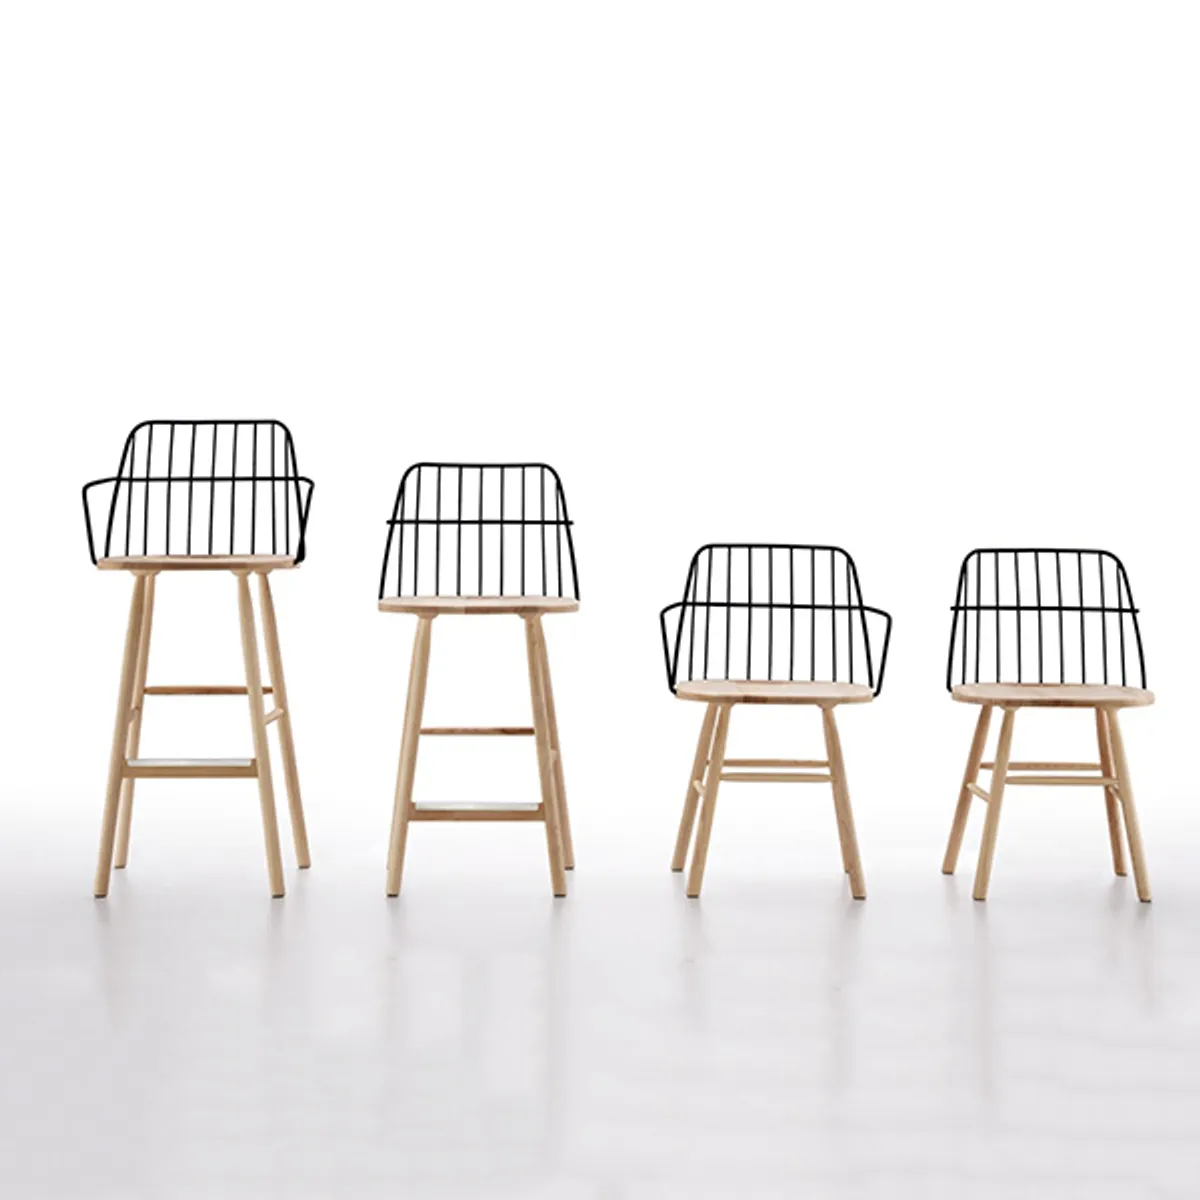 Strike Bar Stool Collection Inside Out Contracts 098